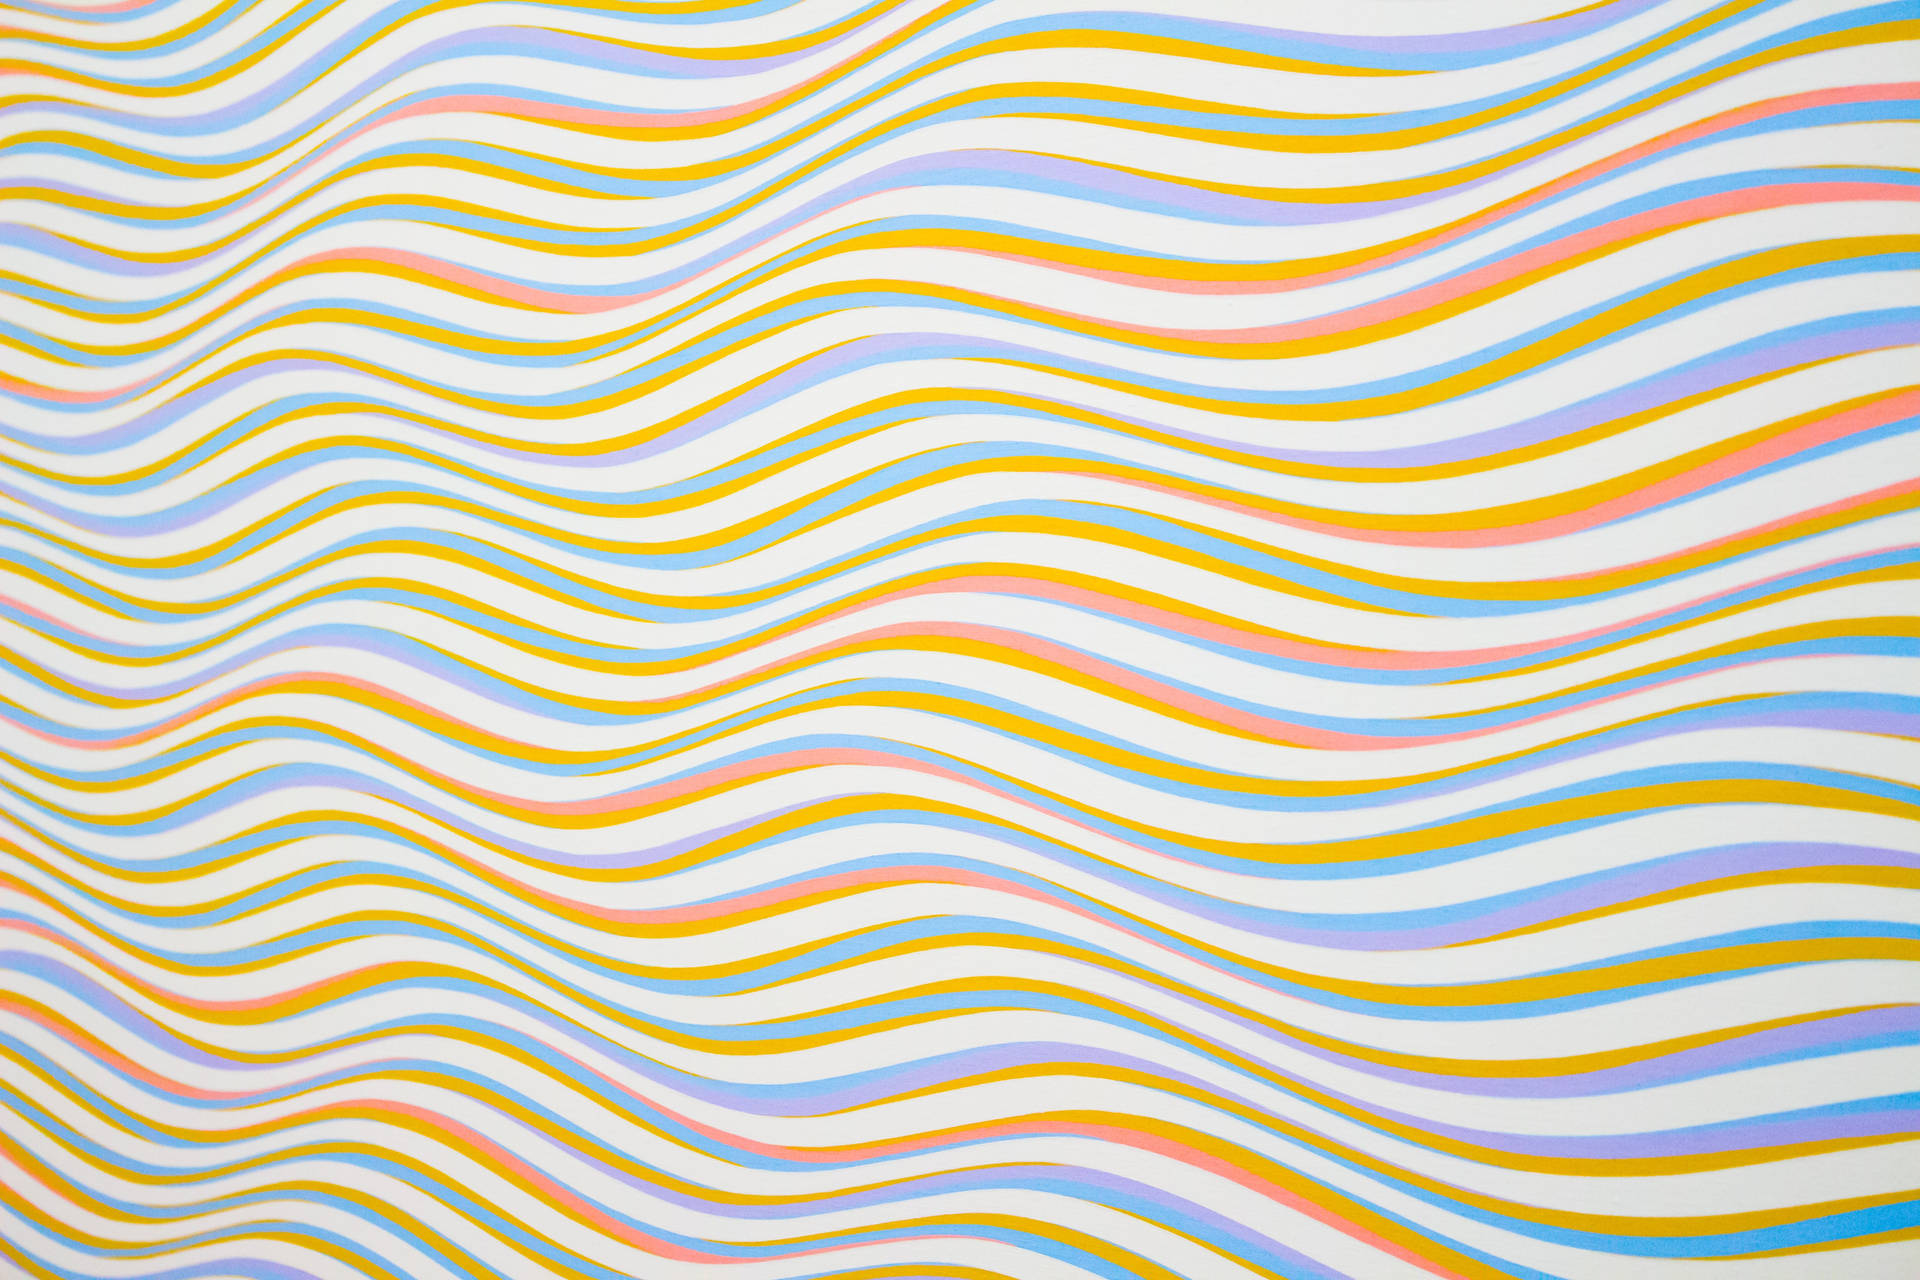 Wavy Lines As Colorful Background Wallpaper